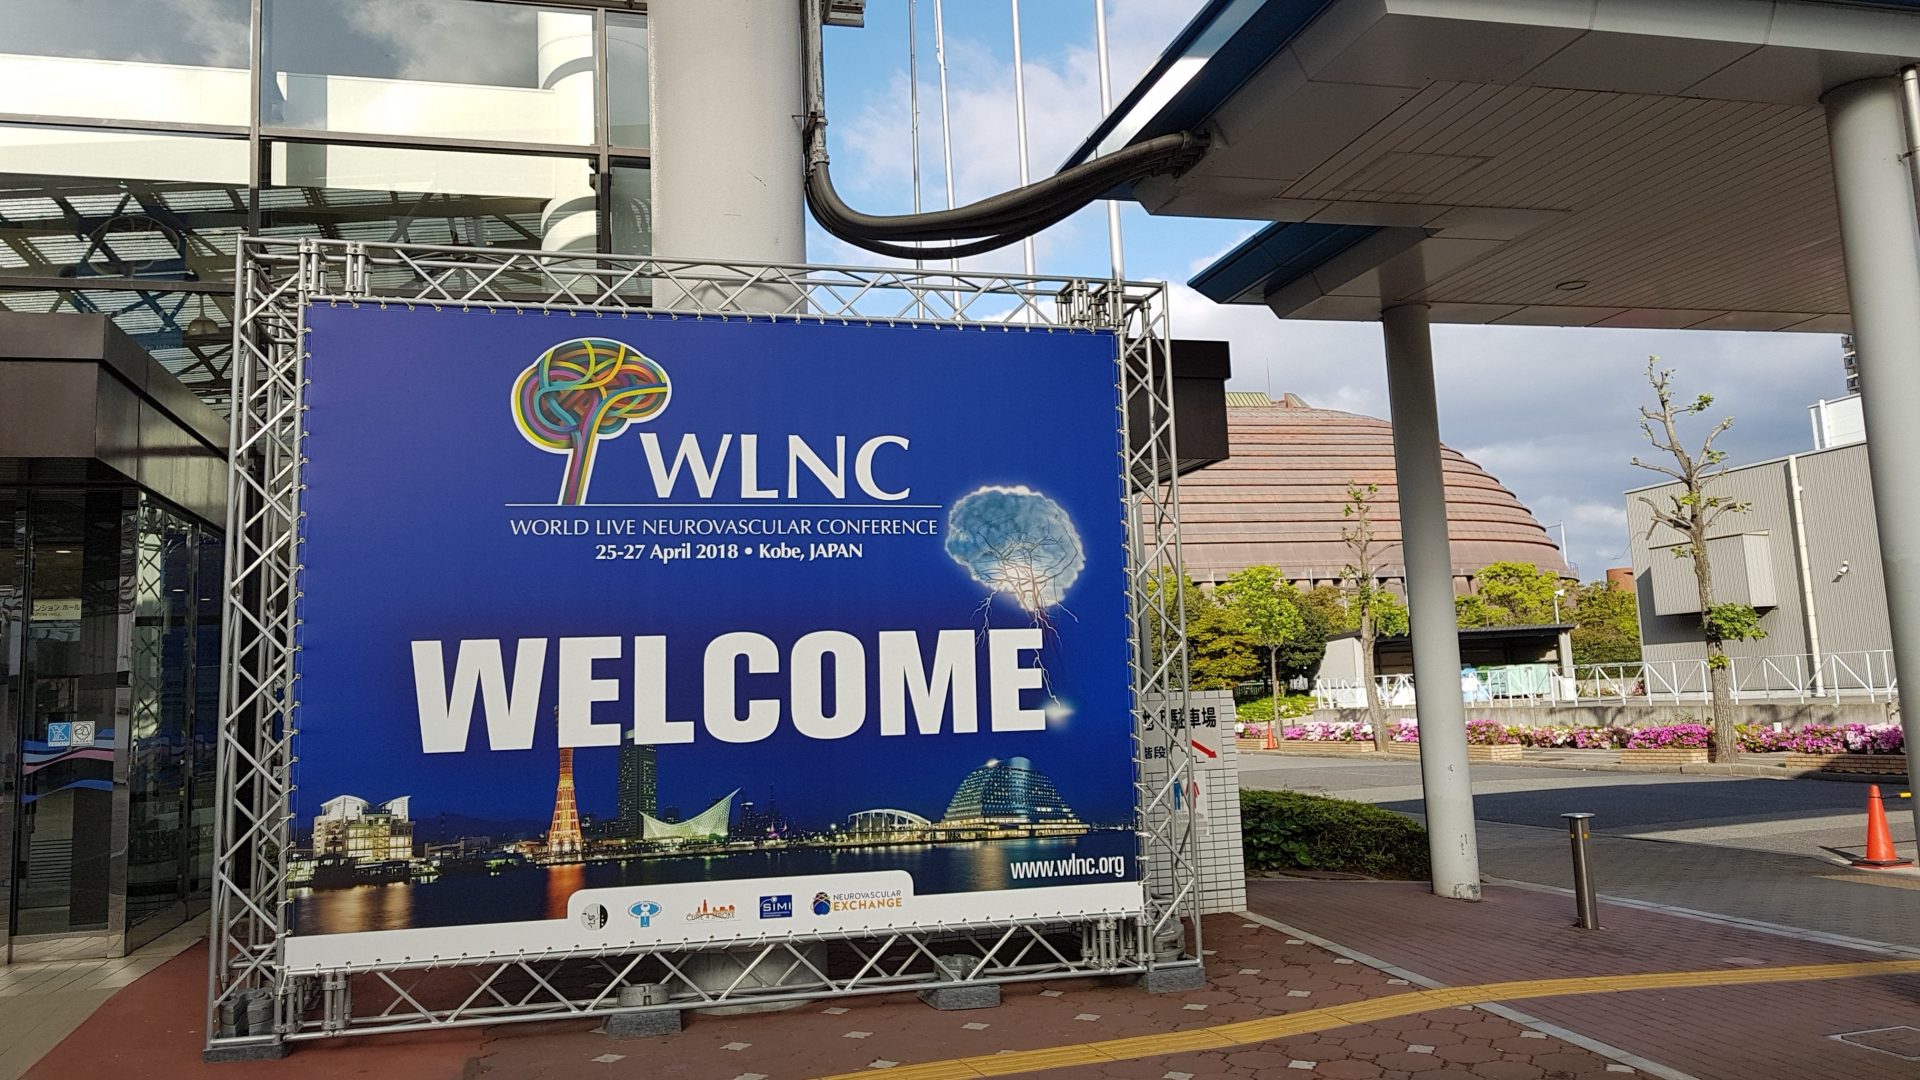 Siriraj Faculty Attended “World Live Neurovascular Conference” in Japan